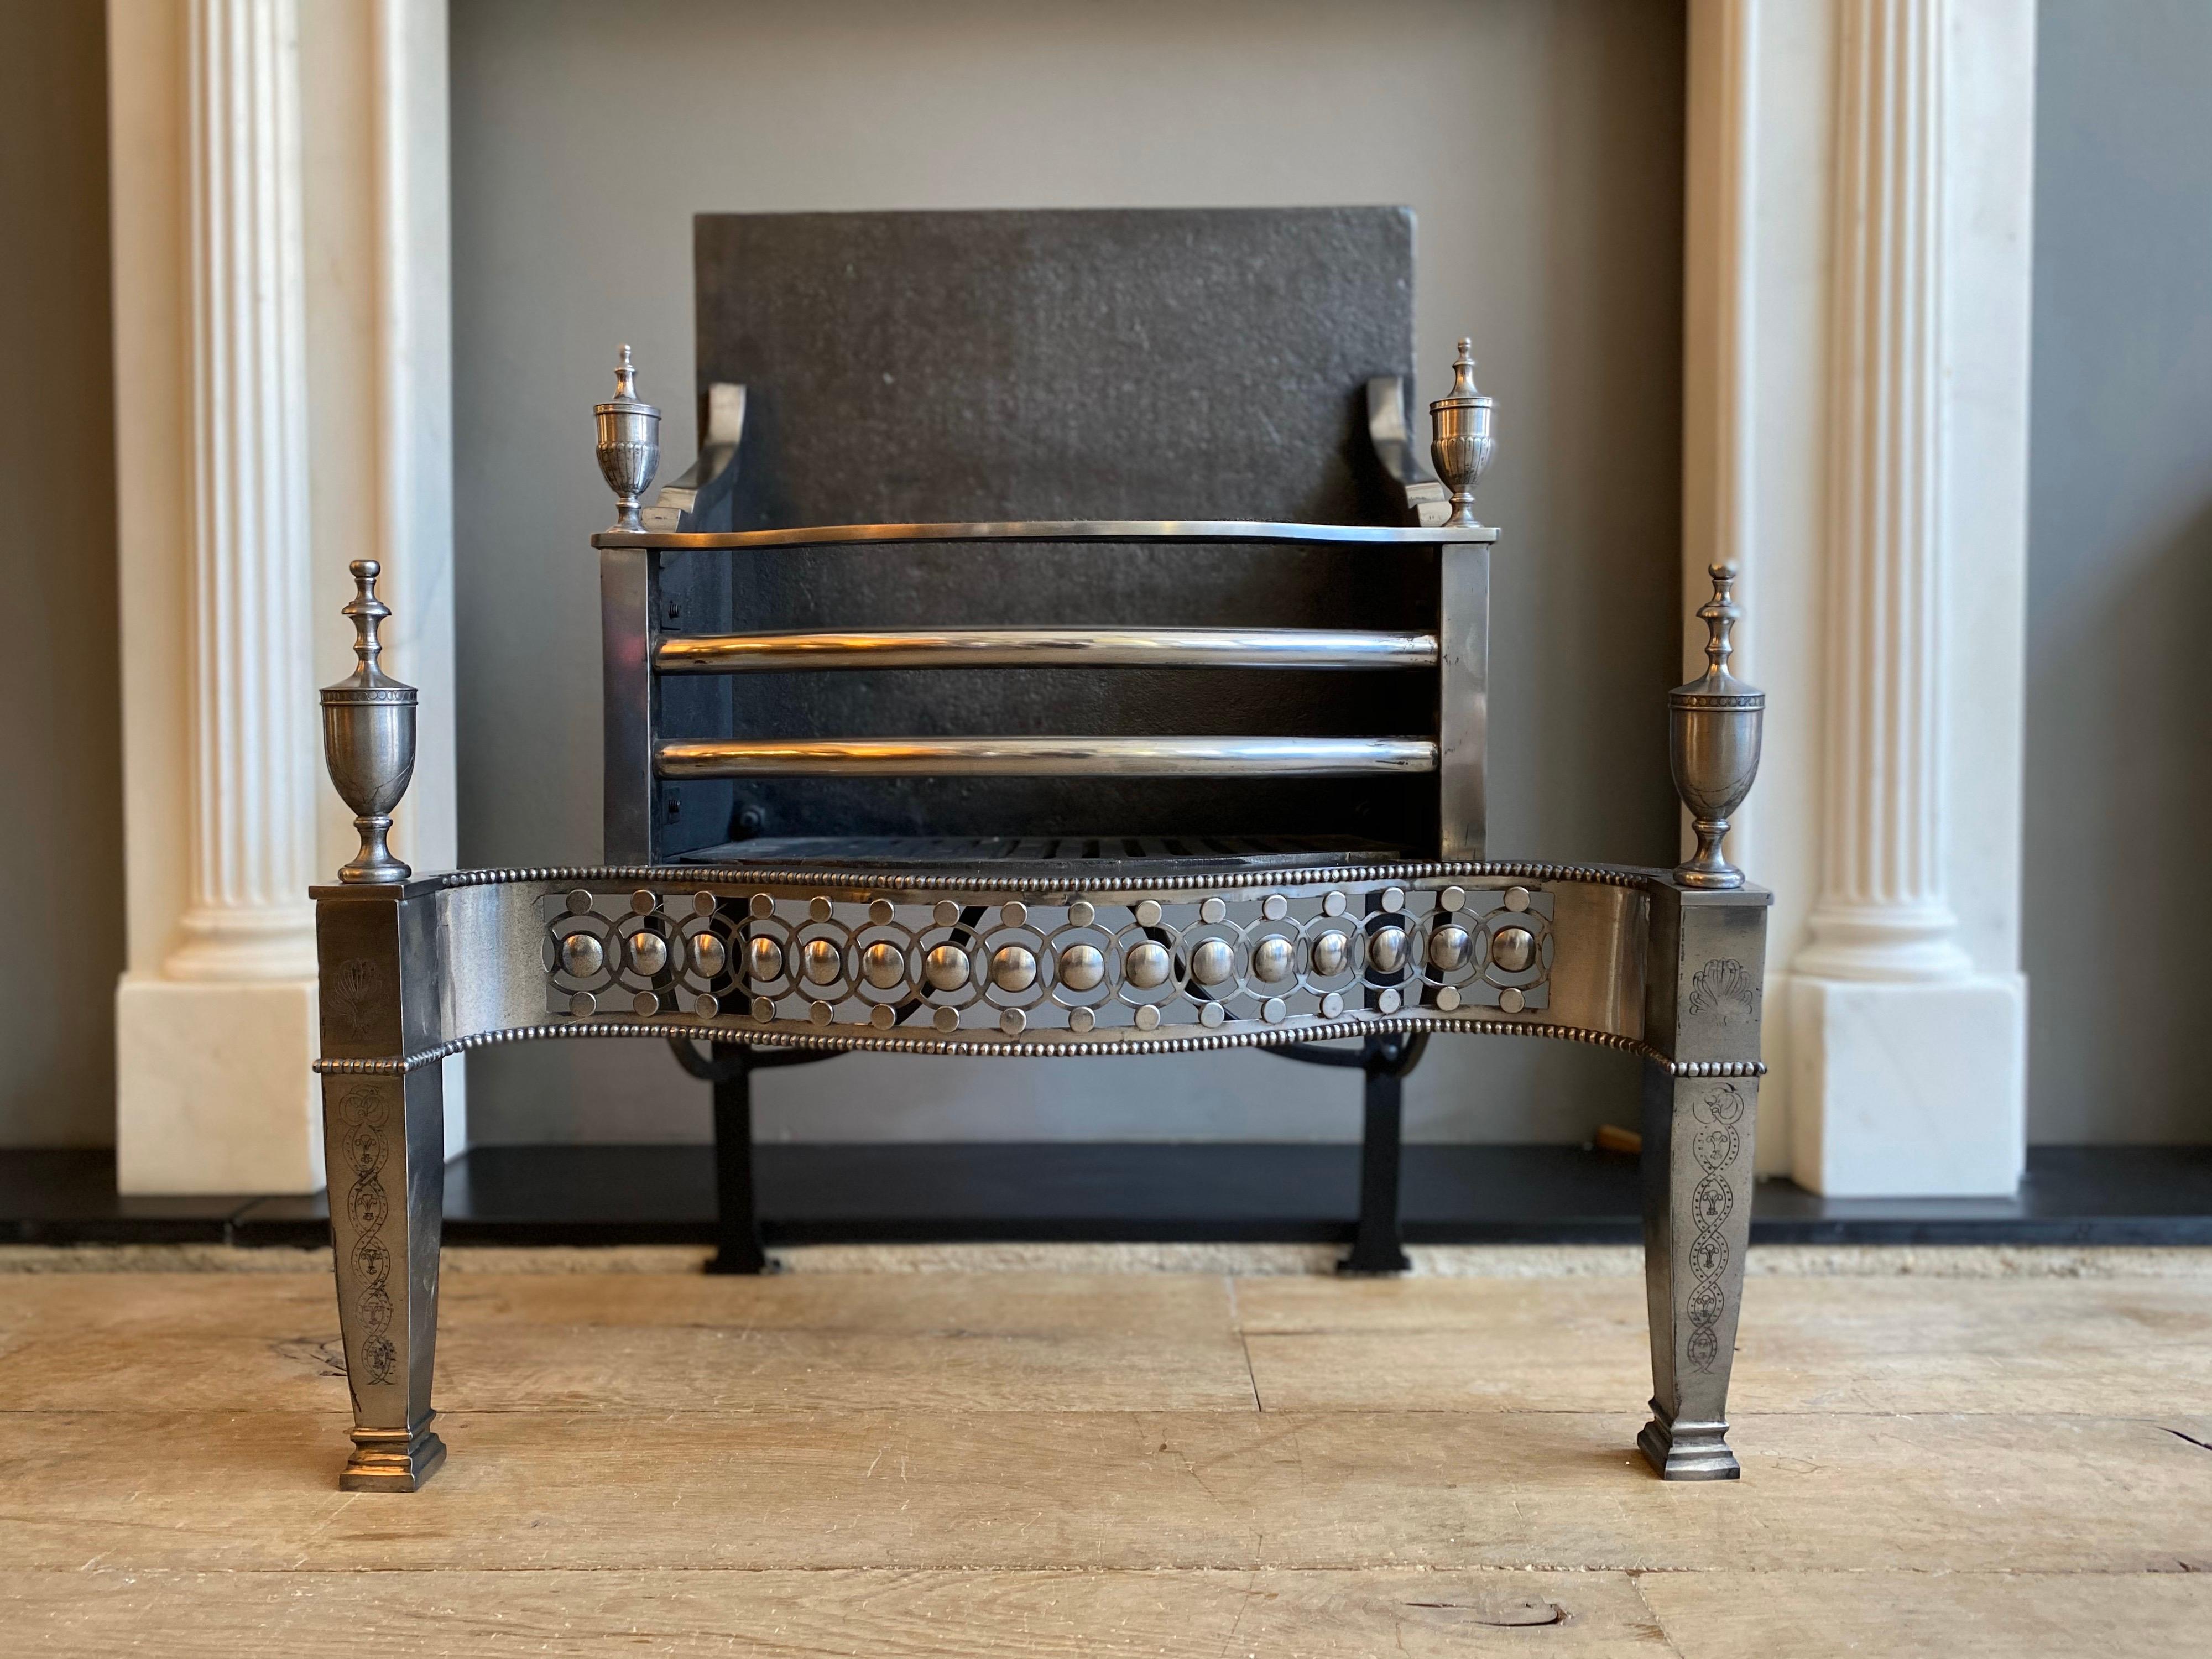 An 18th century style fire grate in polished steel, with worked serpentine fret, engraved column supports and square fire back. A good quality copy of an earlier piece.